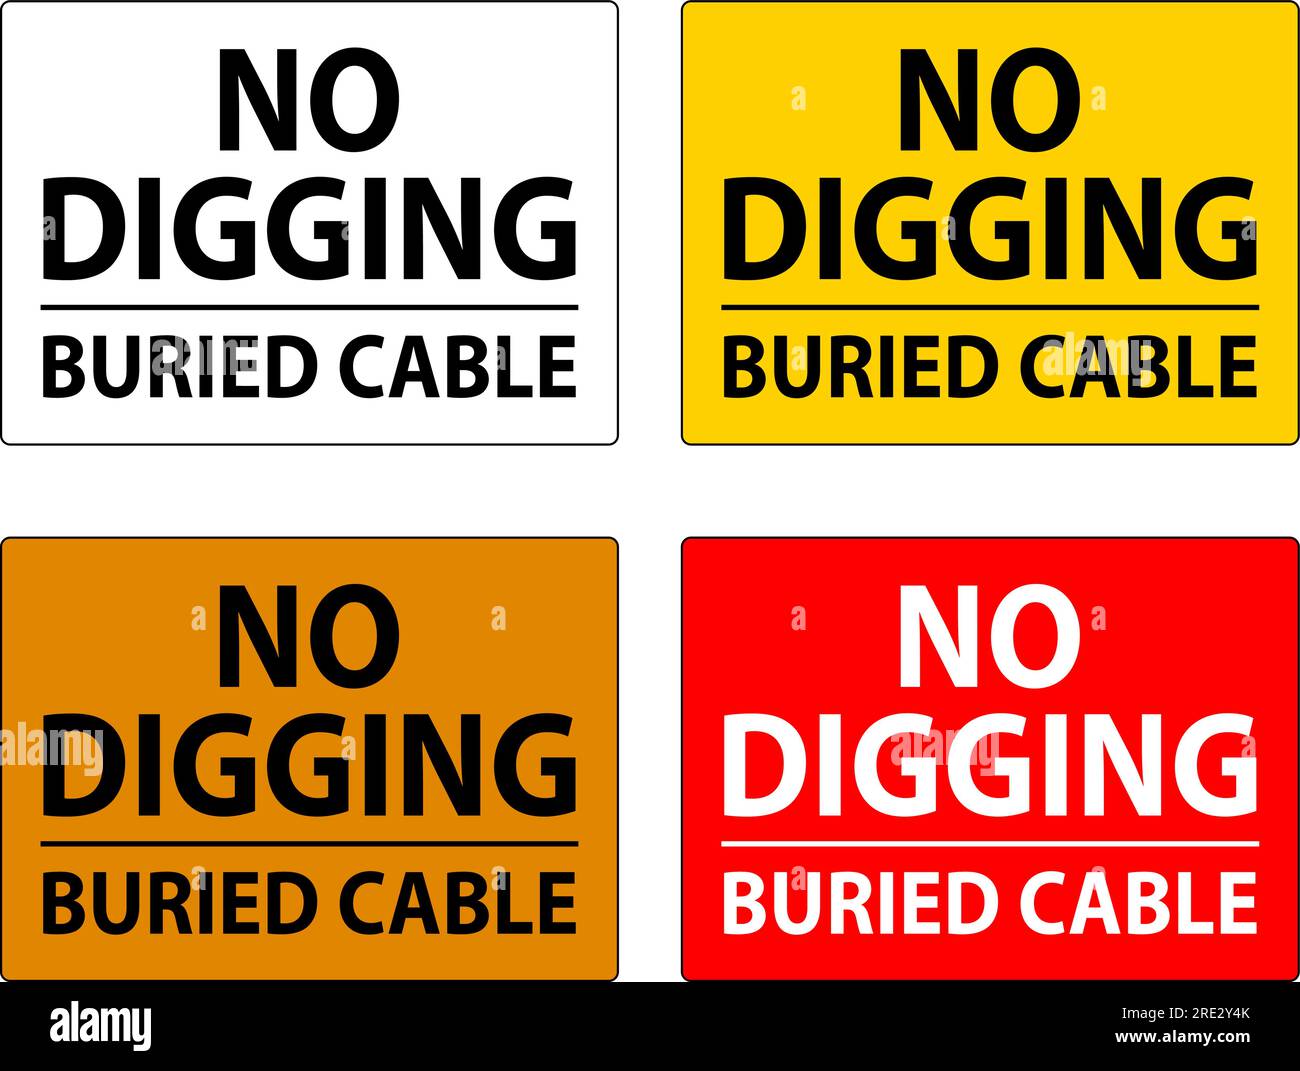 No Digging Sign, Buried Cable Sign Stock Vector